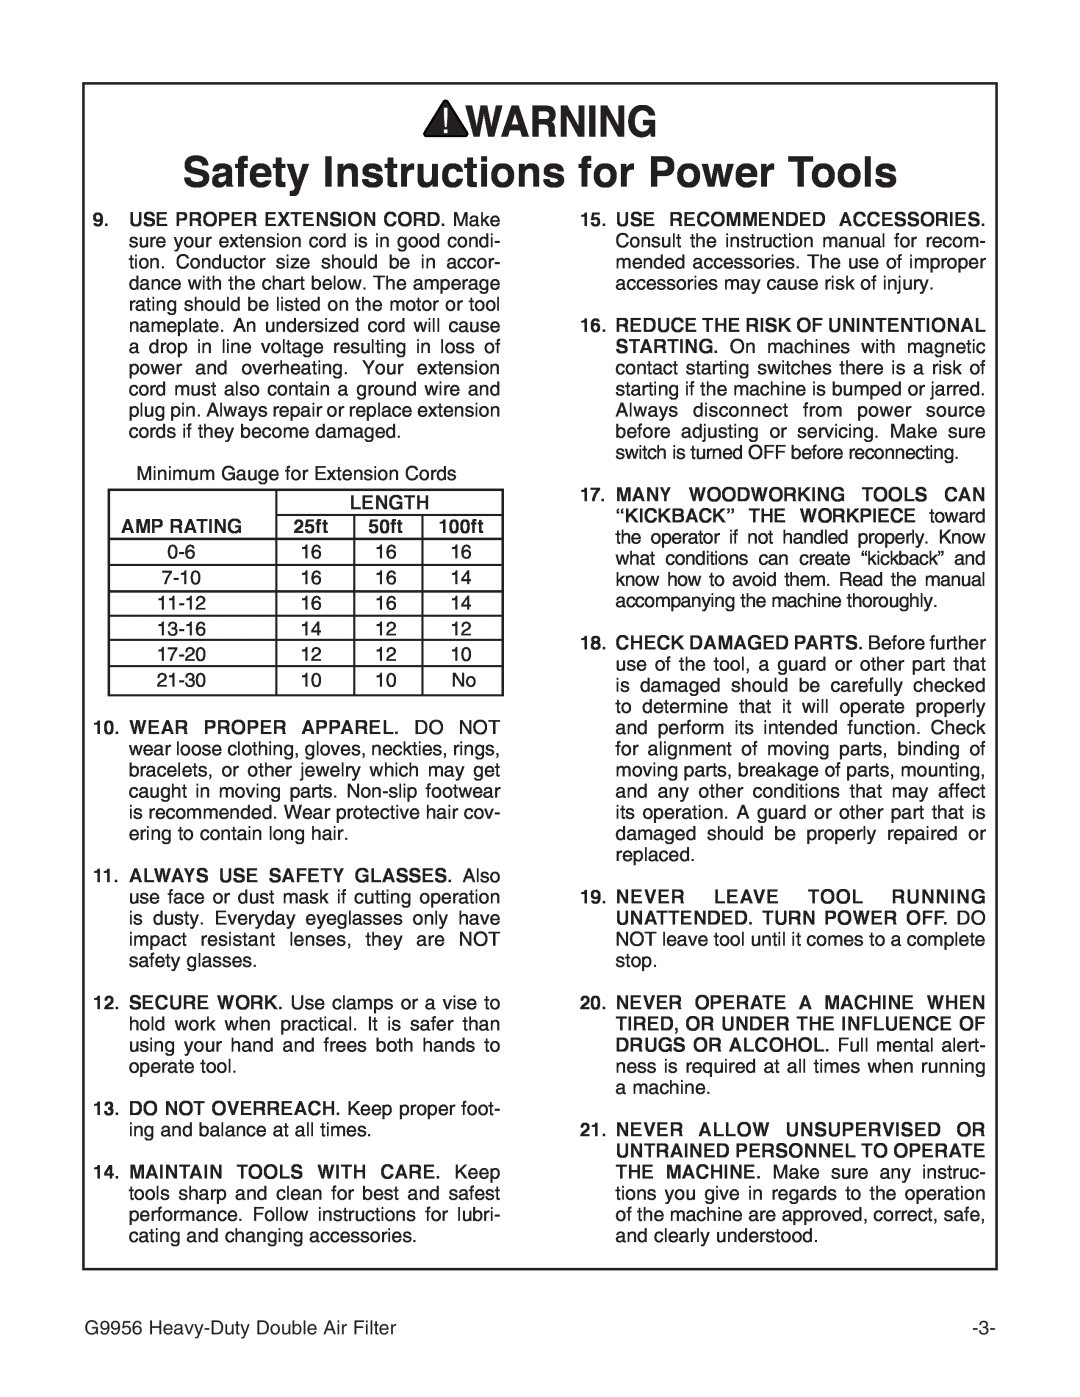 Grizzly G9956 instruction manual Safety Instructions for Power Tools, Amp Rating 